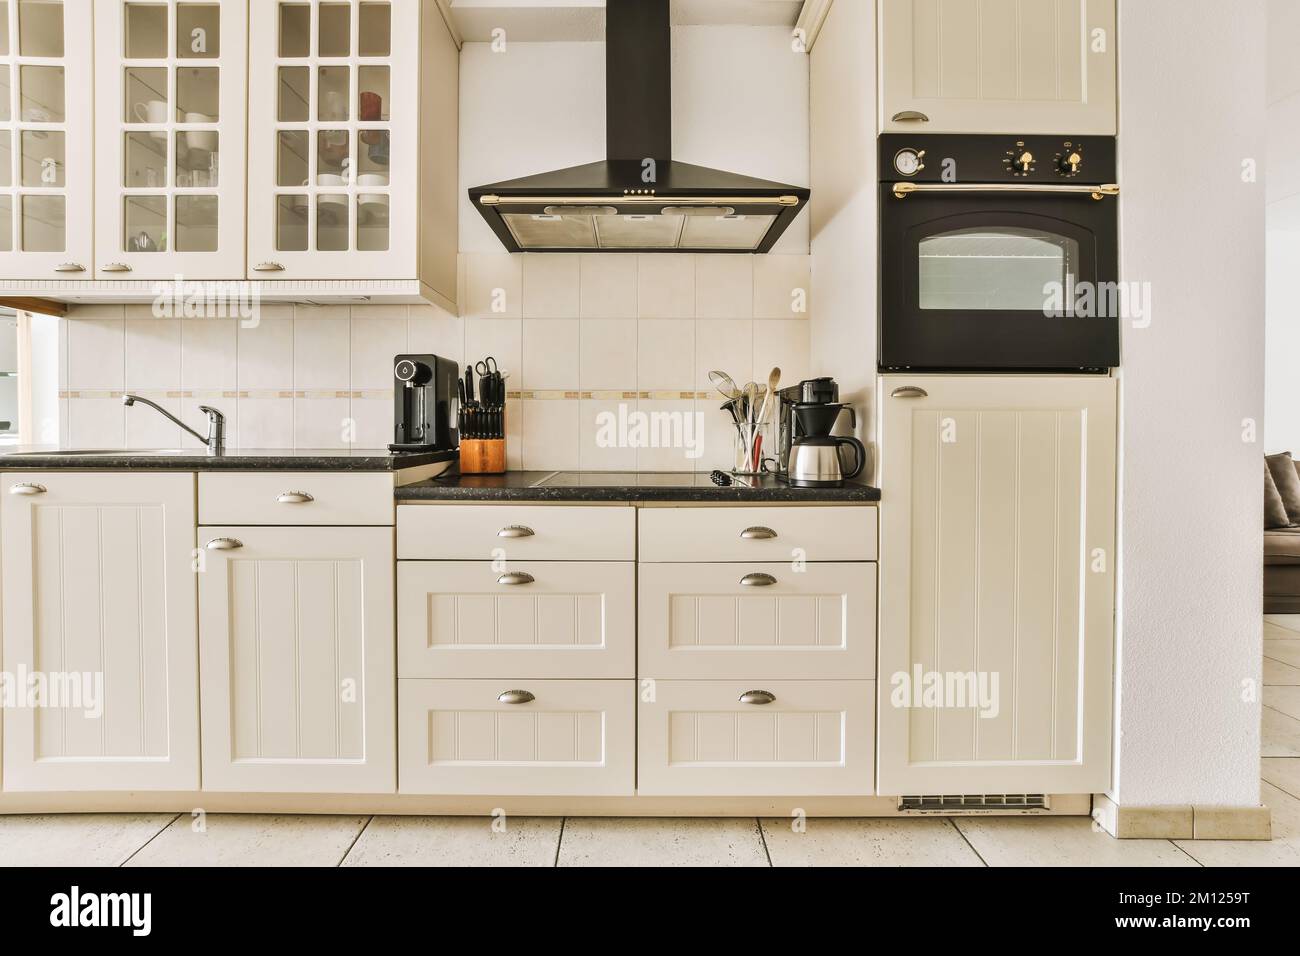 a kitchen with white cupboards and black counter tops on the counters in this photo is taken from the inside Stock Photo